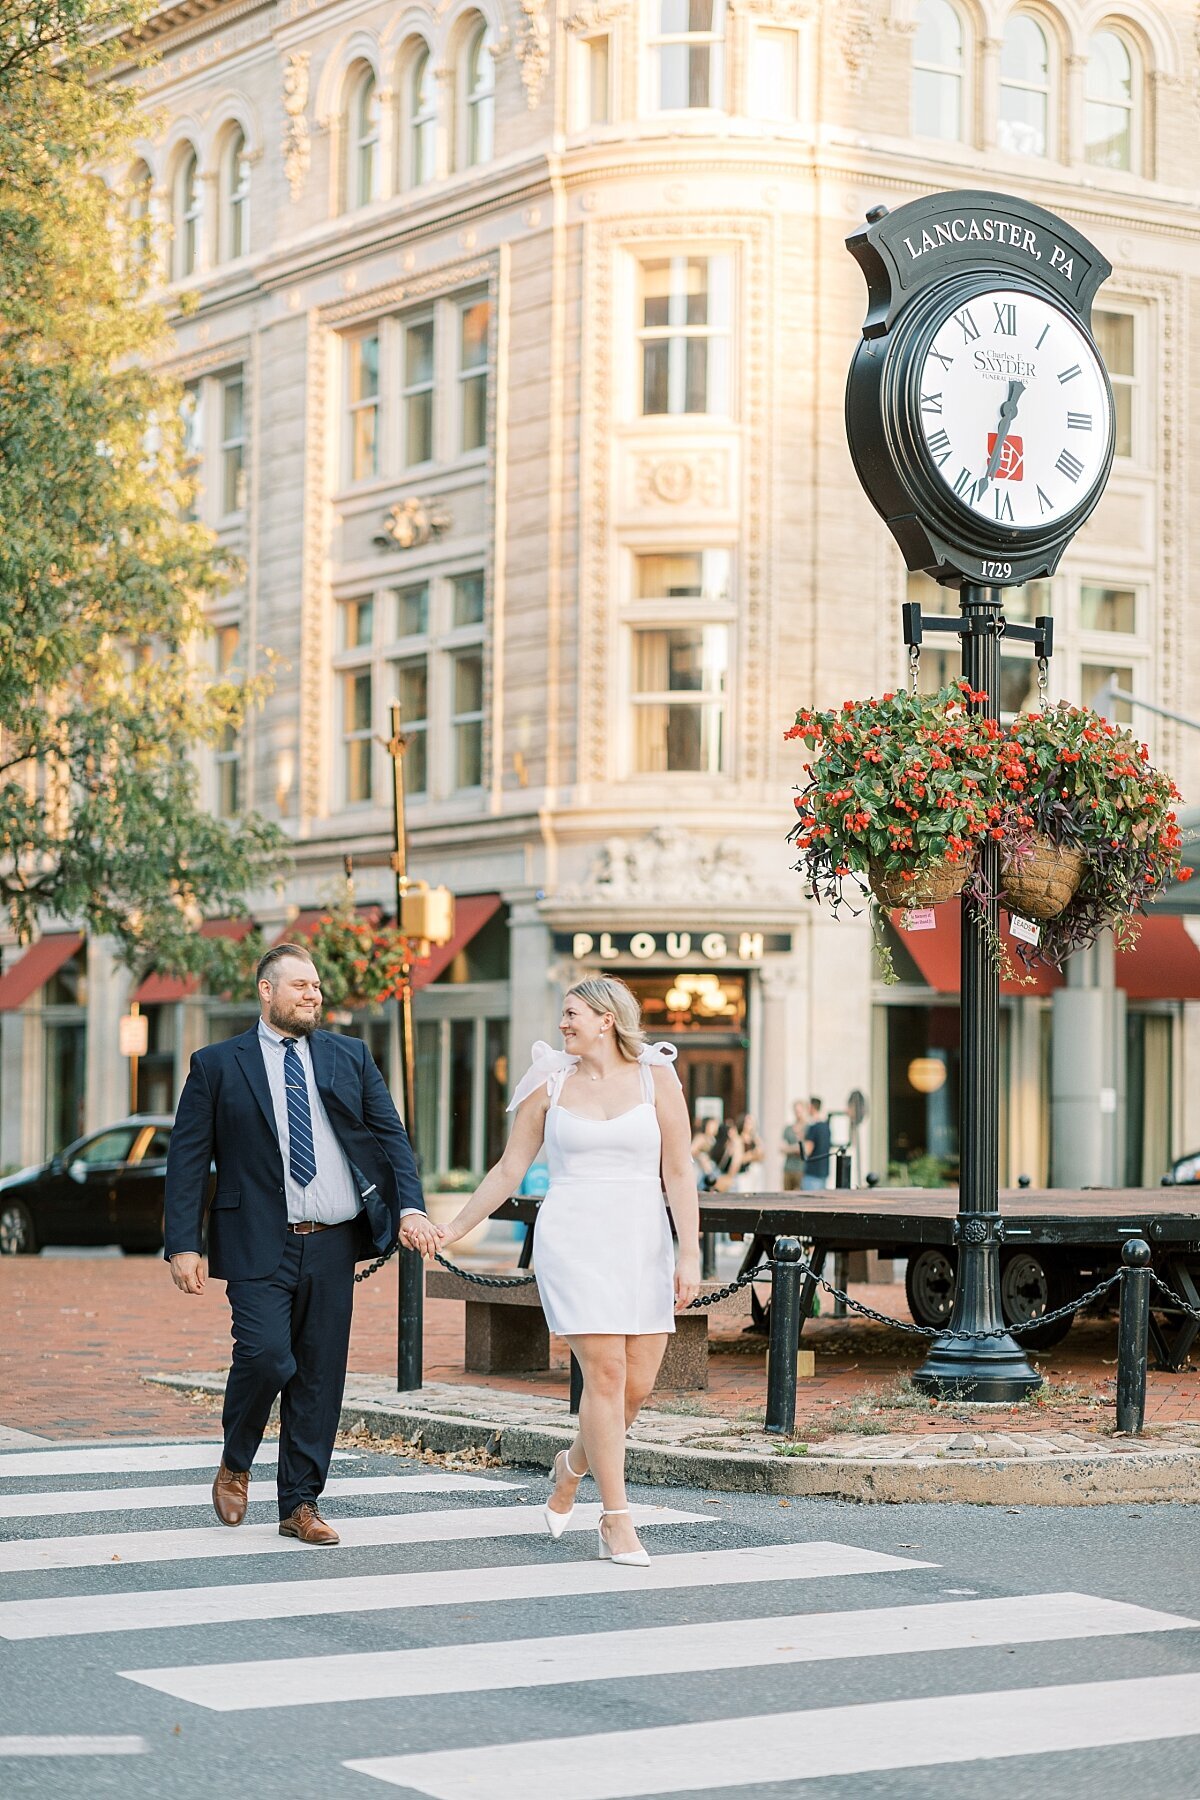 downtown Lancaster engagement session at Marriot square